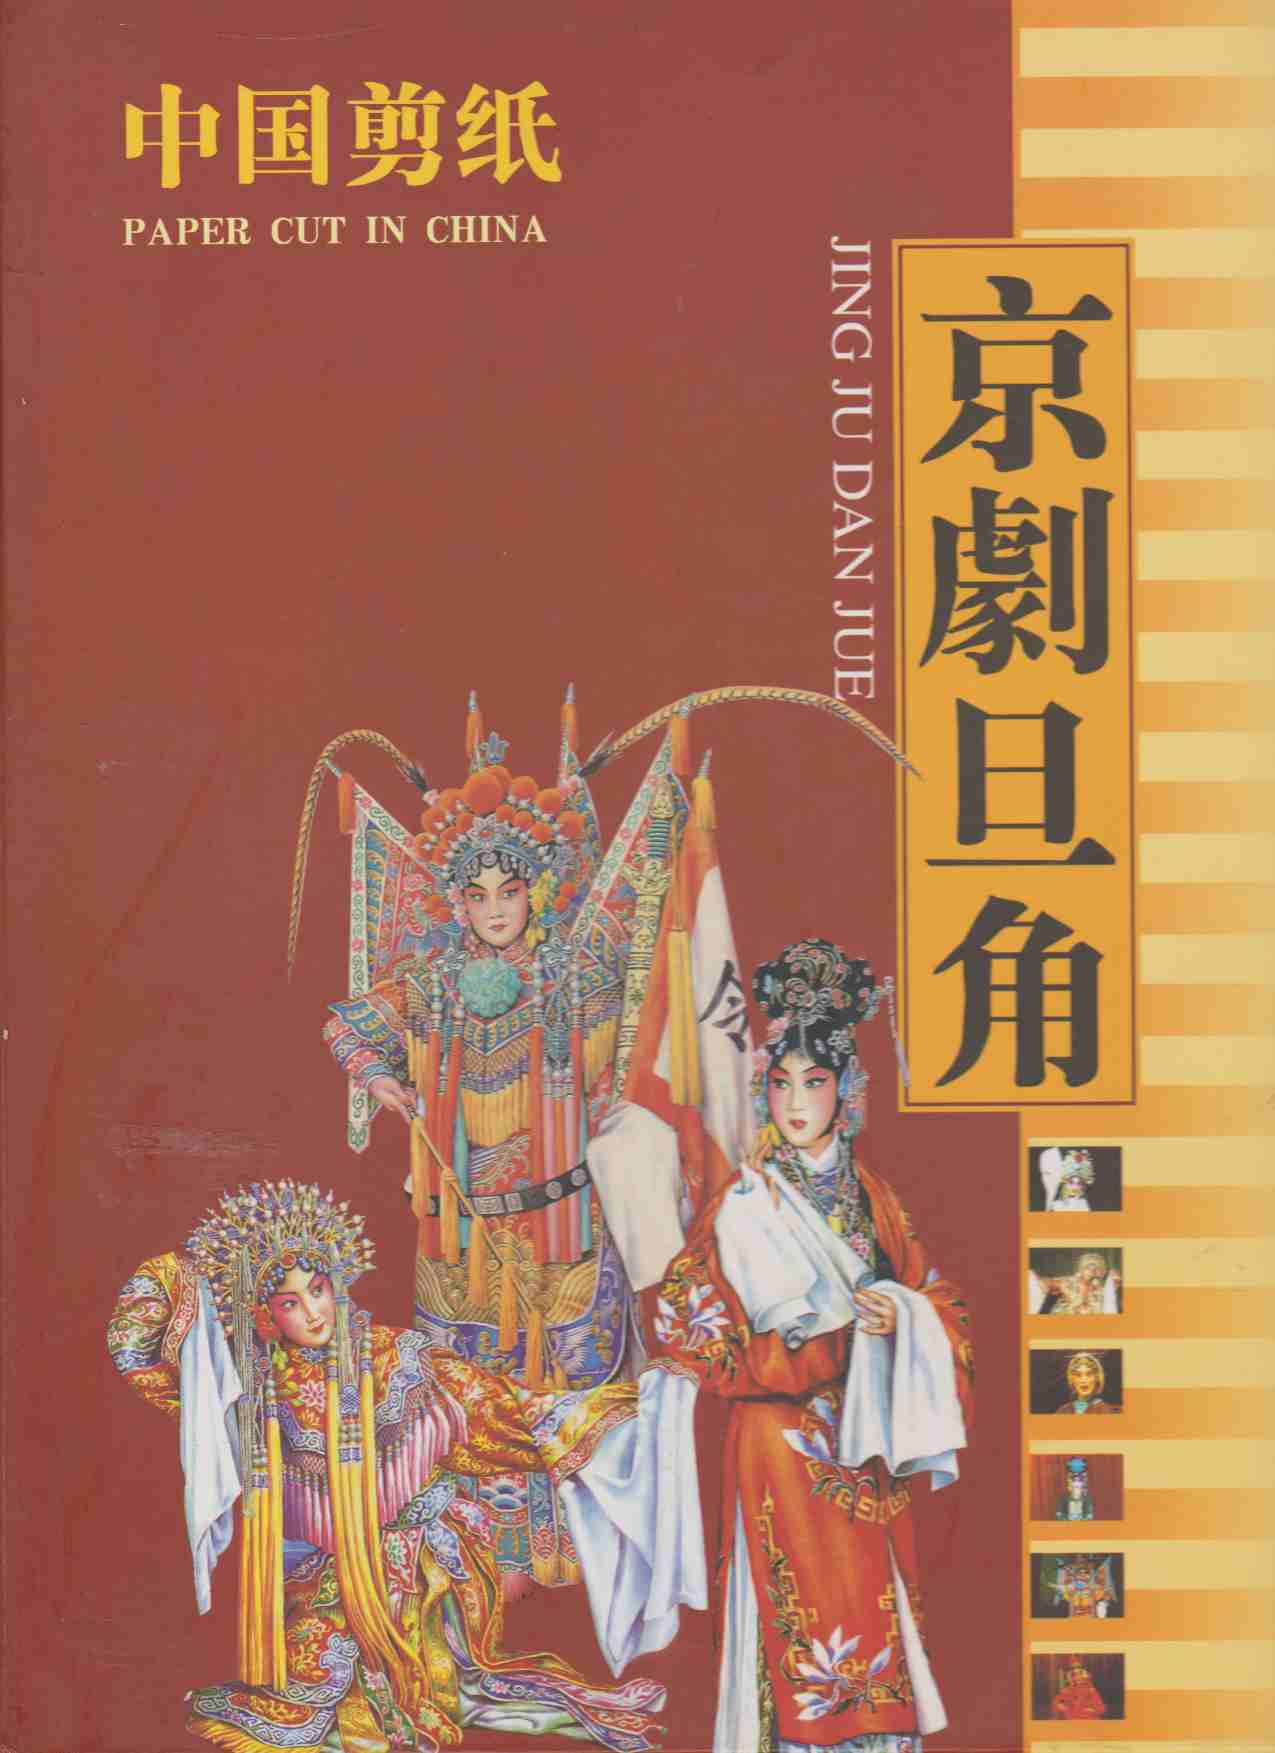 Image for JING JU DAN JUE. DAN ROLES OF BEIJING OPERA. REPRESENTING THE FEMALE ROLES OF PEKING OPERA. TEXT IN ENGLISH AND CHINESE (PAPER CUT IN CHINA)